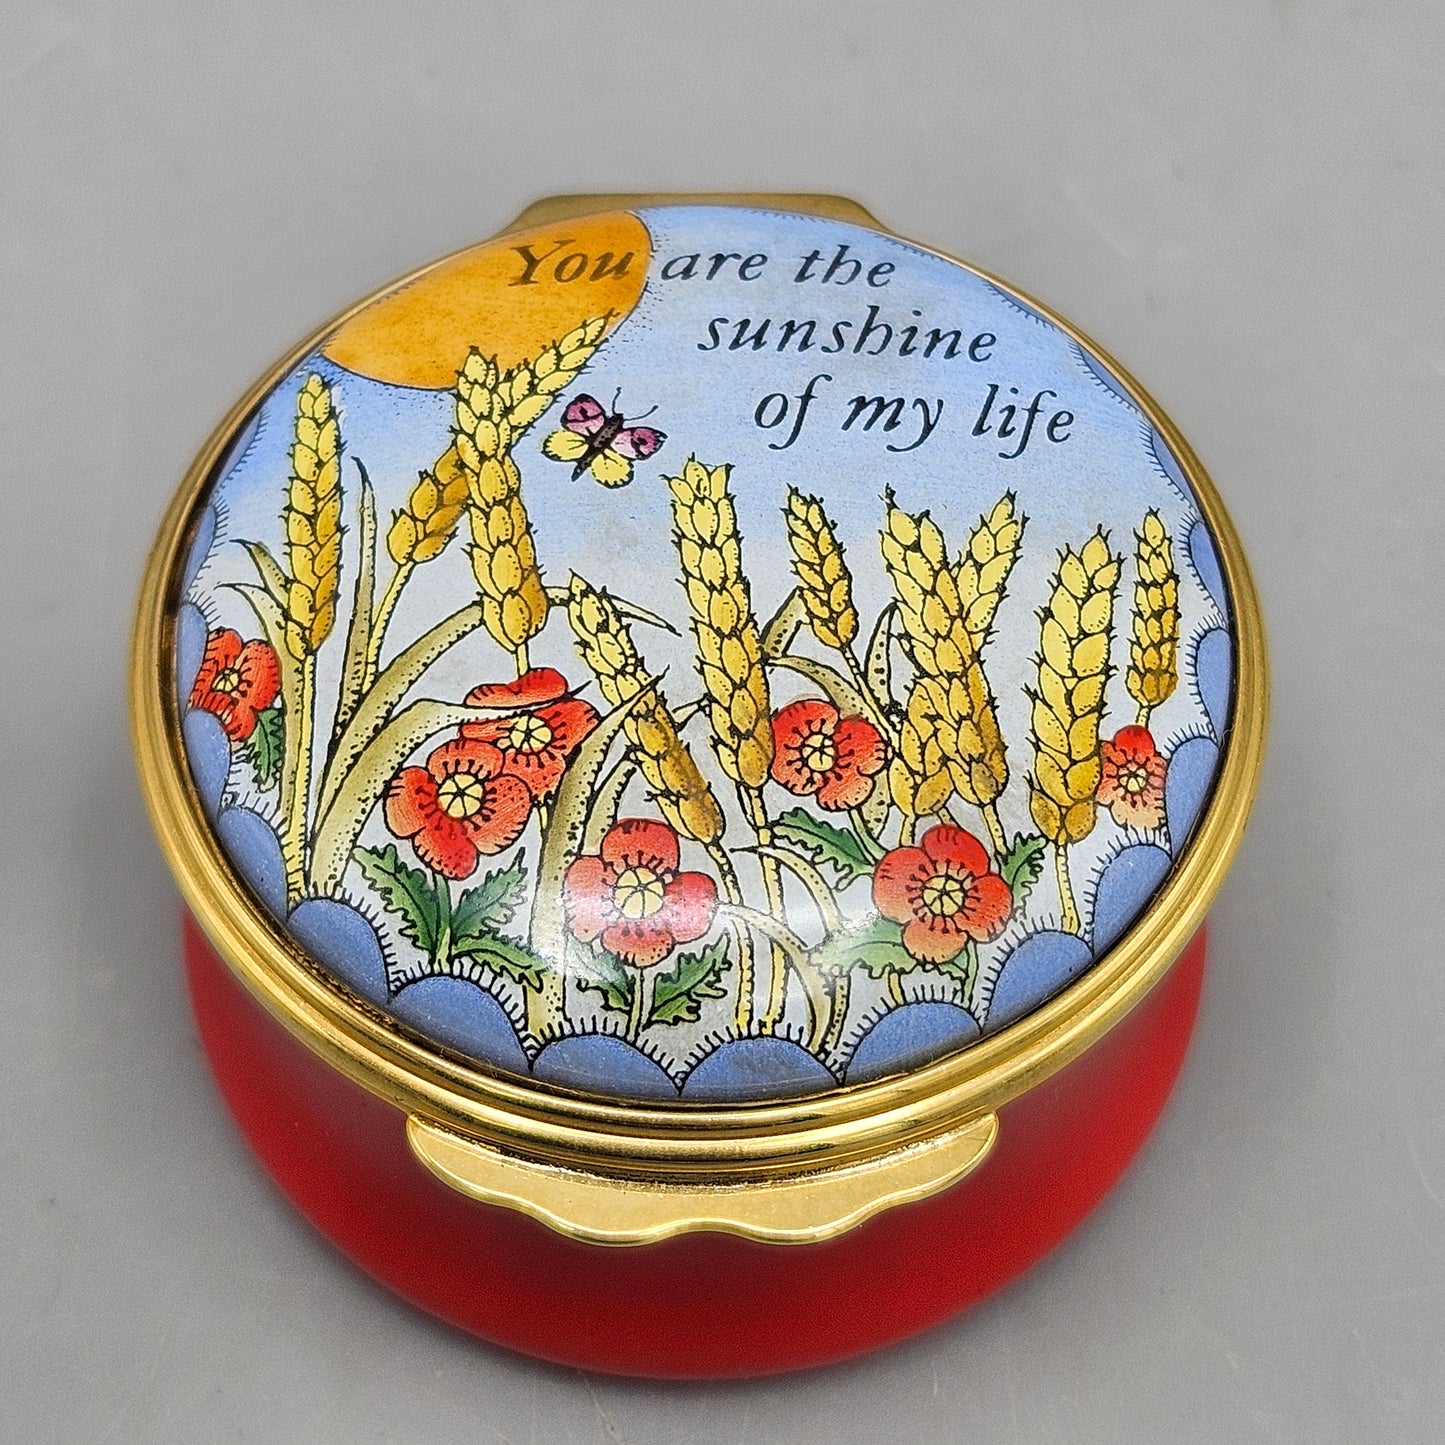 Vintage Halcyon Days You Are the Sunshine of My Life Trinket Box